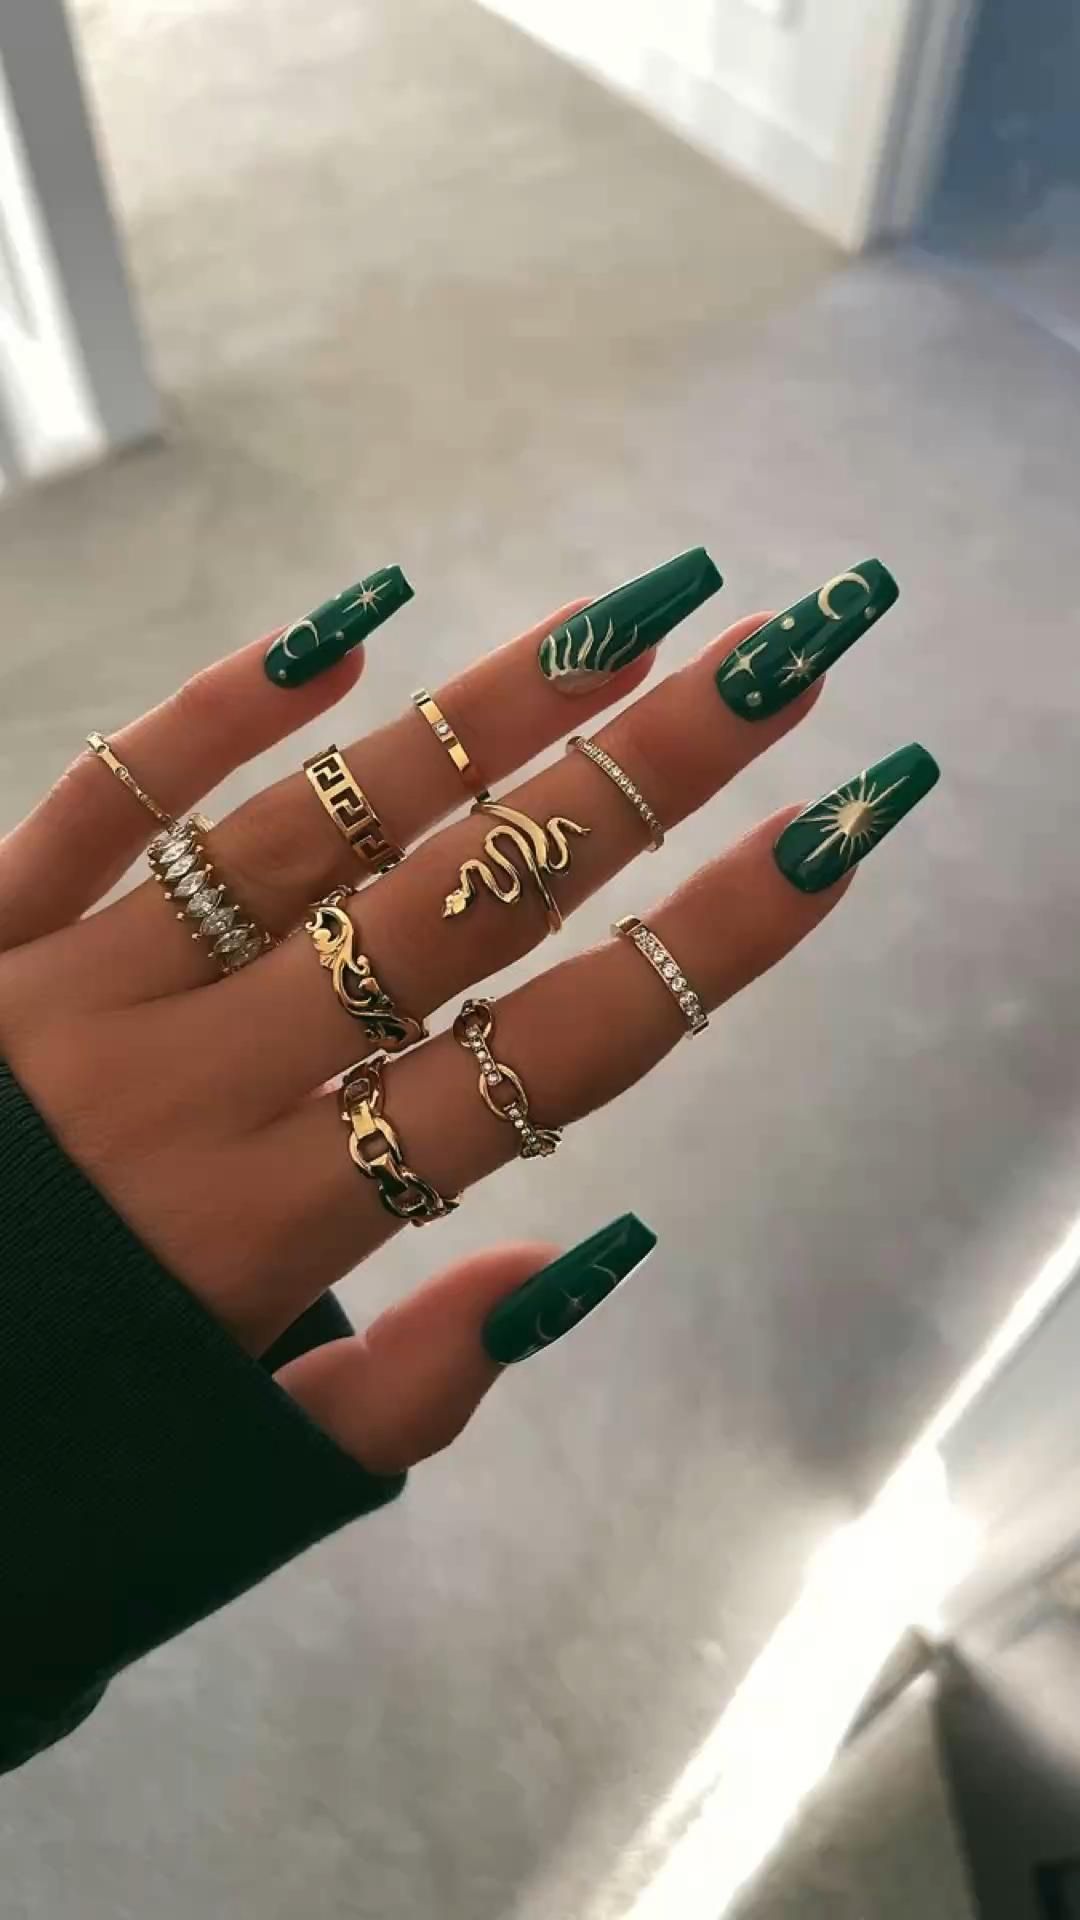 Chic Nail Art Ideas For You